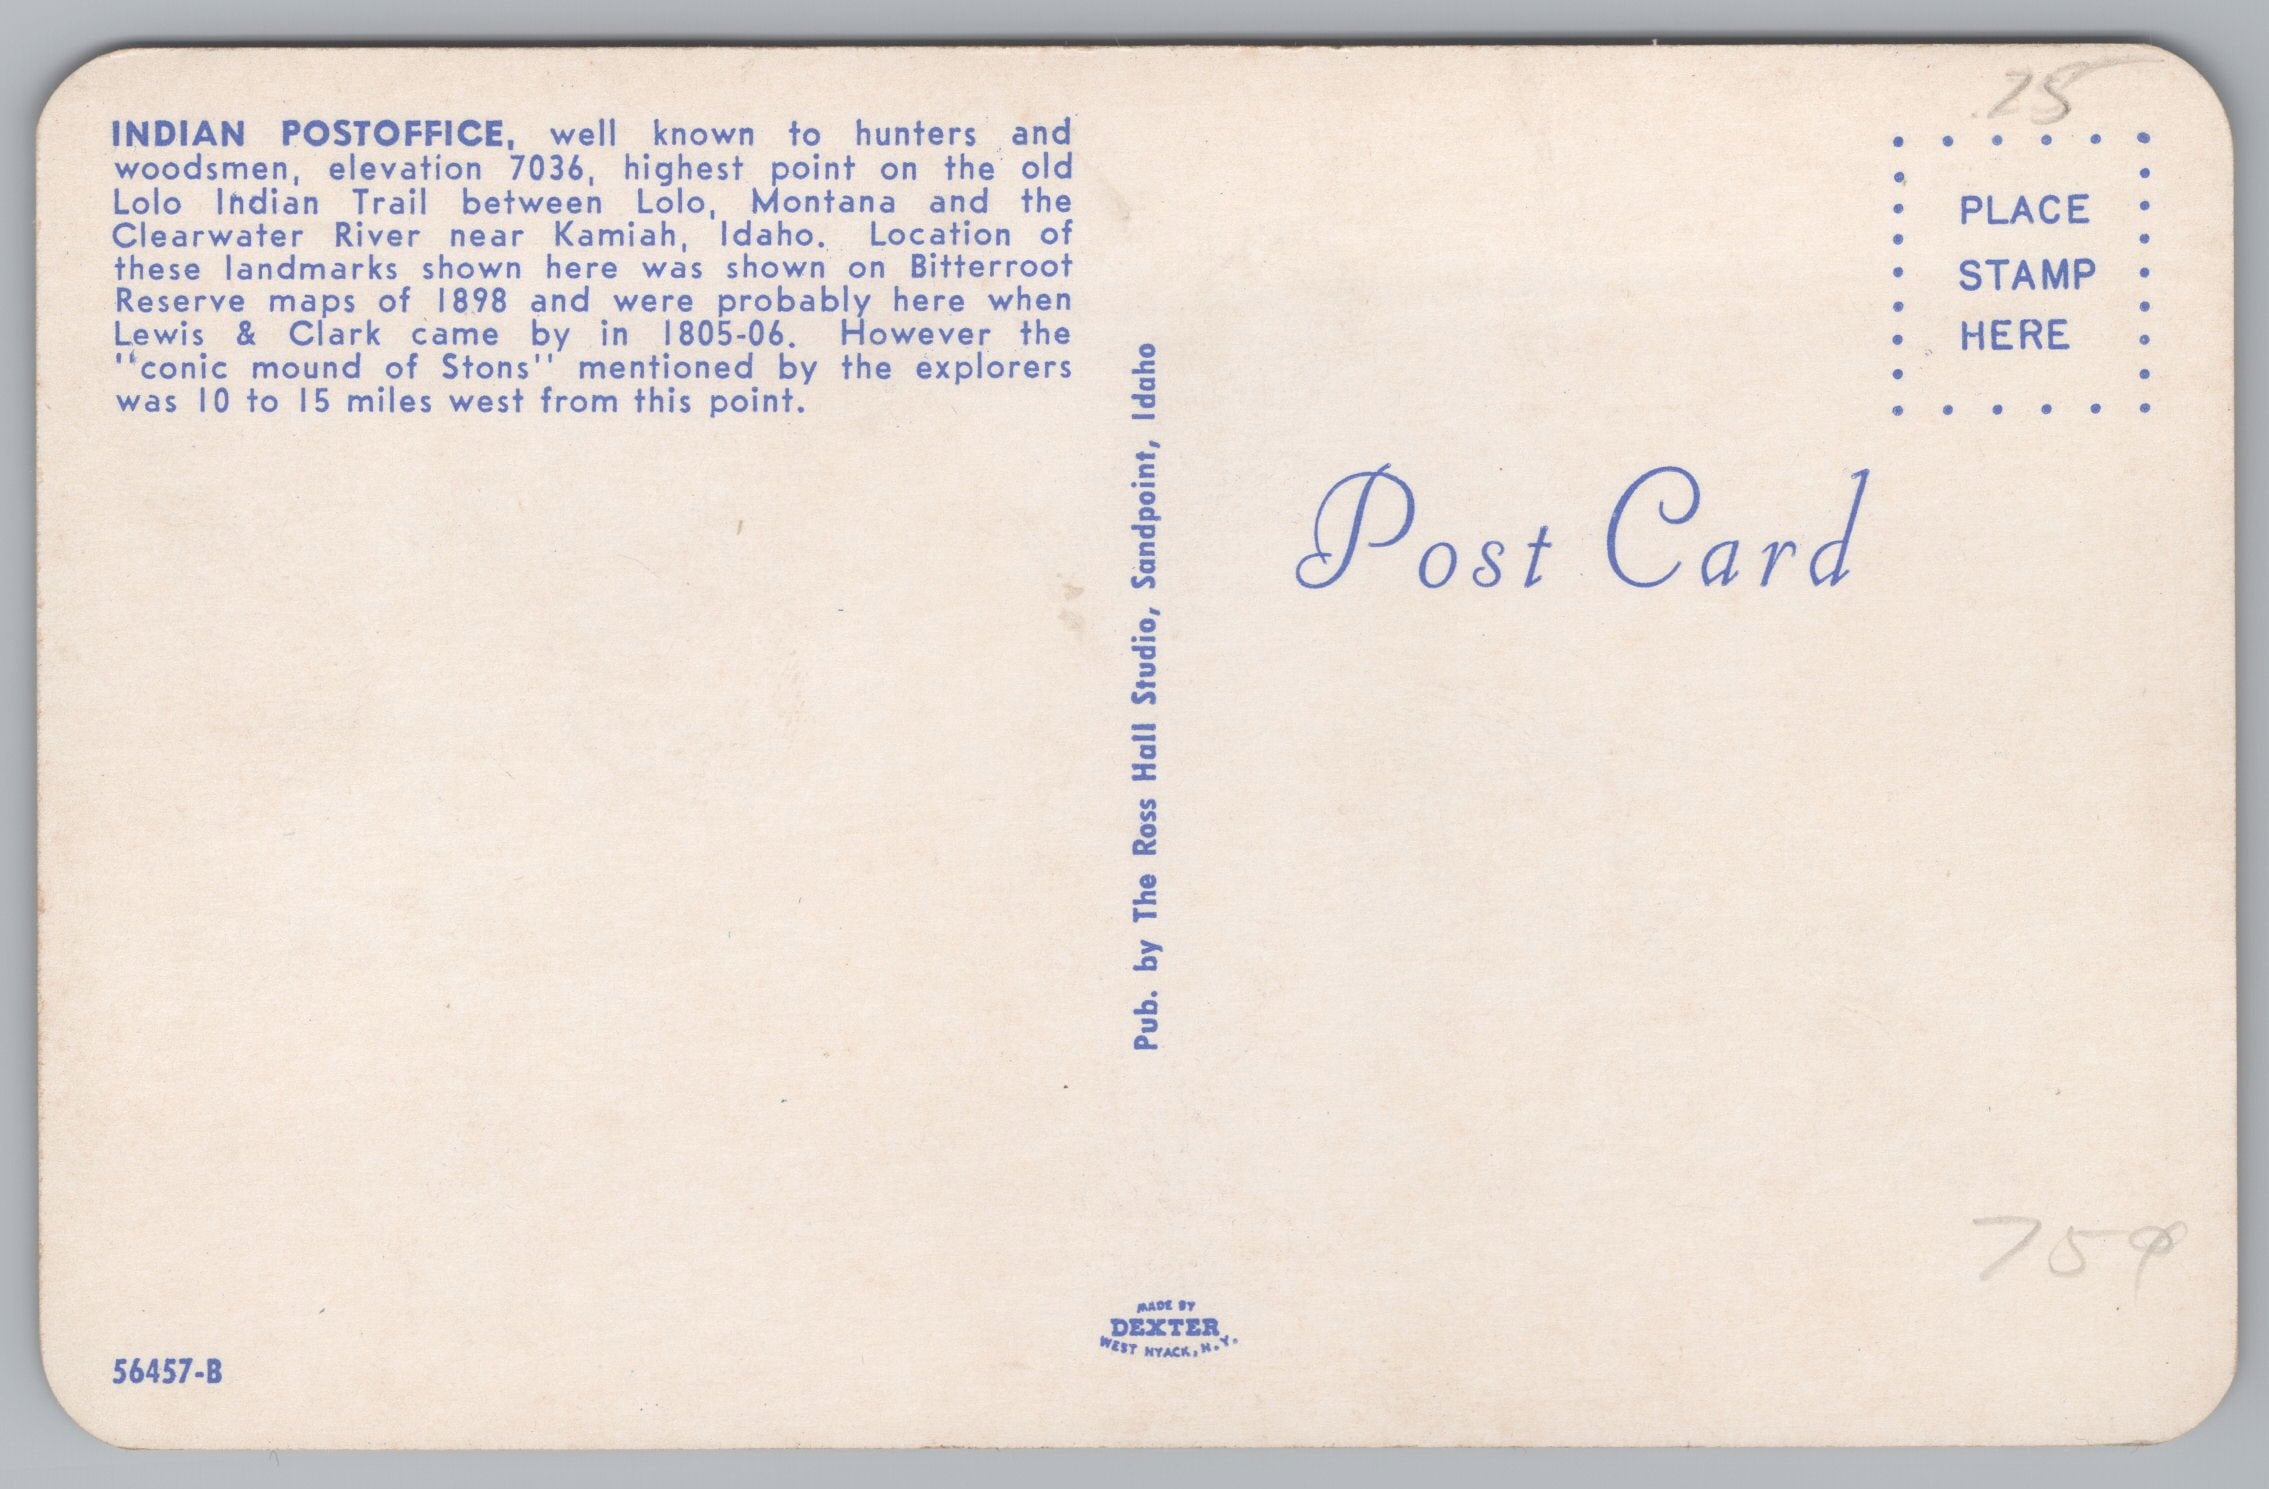 Indian Post Office, Lolo Indian Trail, Idaho, Vintage Post Card.